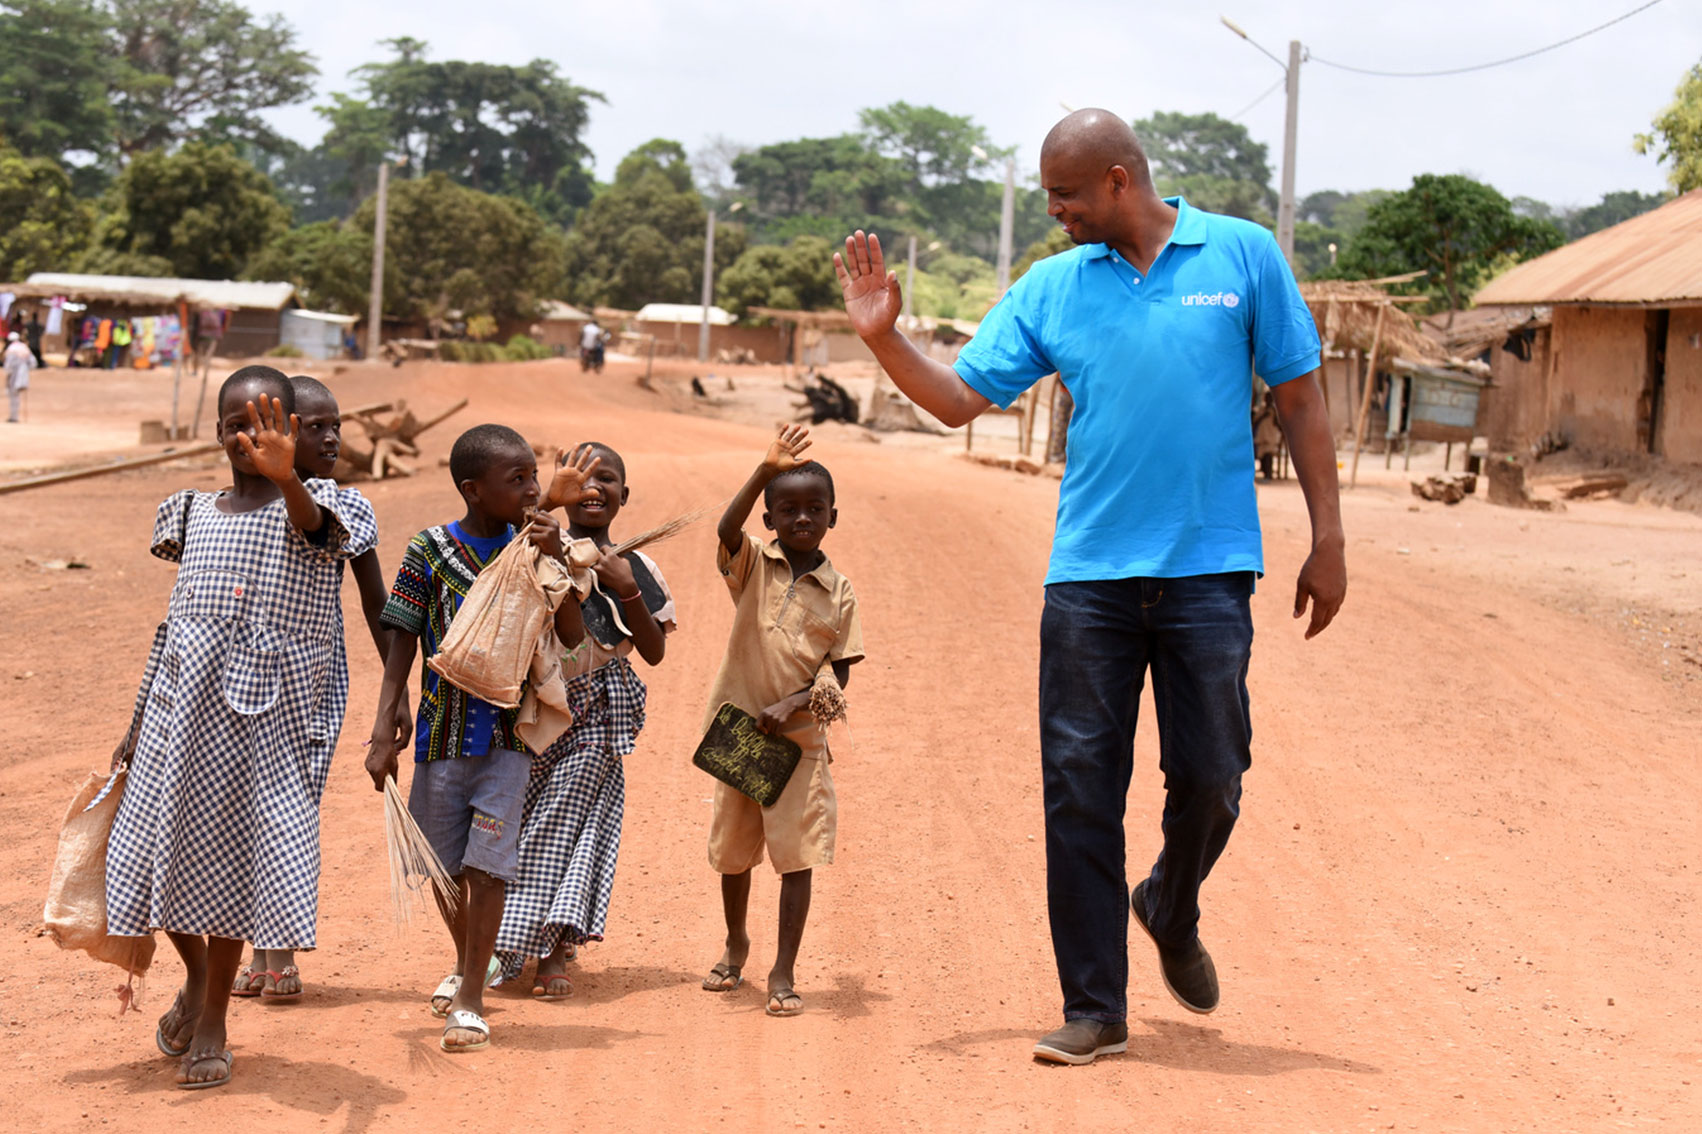 Aboubacar walking along a dirt road and children are walking on his right side. They are all waving at each other.